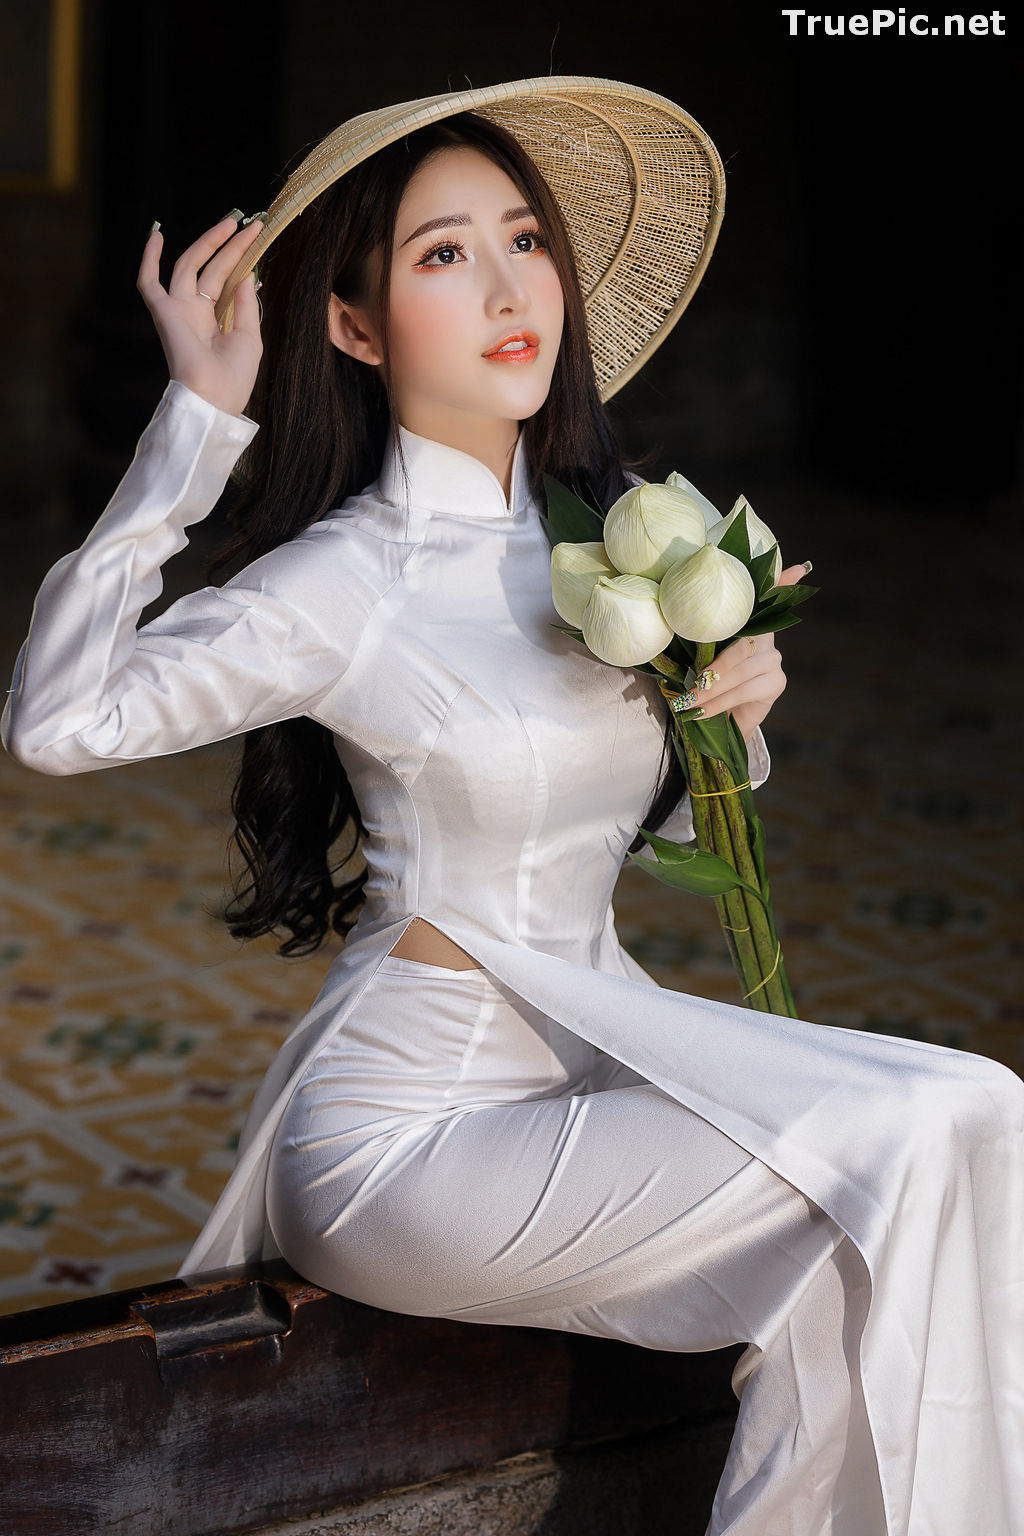 Image The Beauty of Vietnamese Girls with Traditional Dress (Ao Dai) #2 - TruePic.net - Picture-29